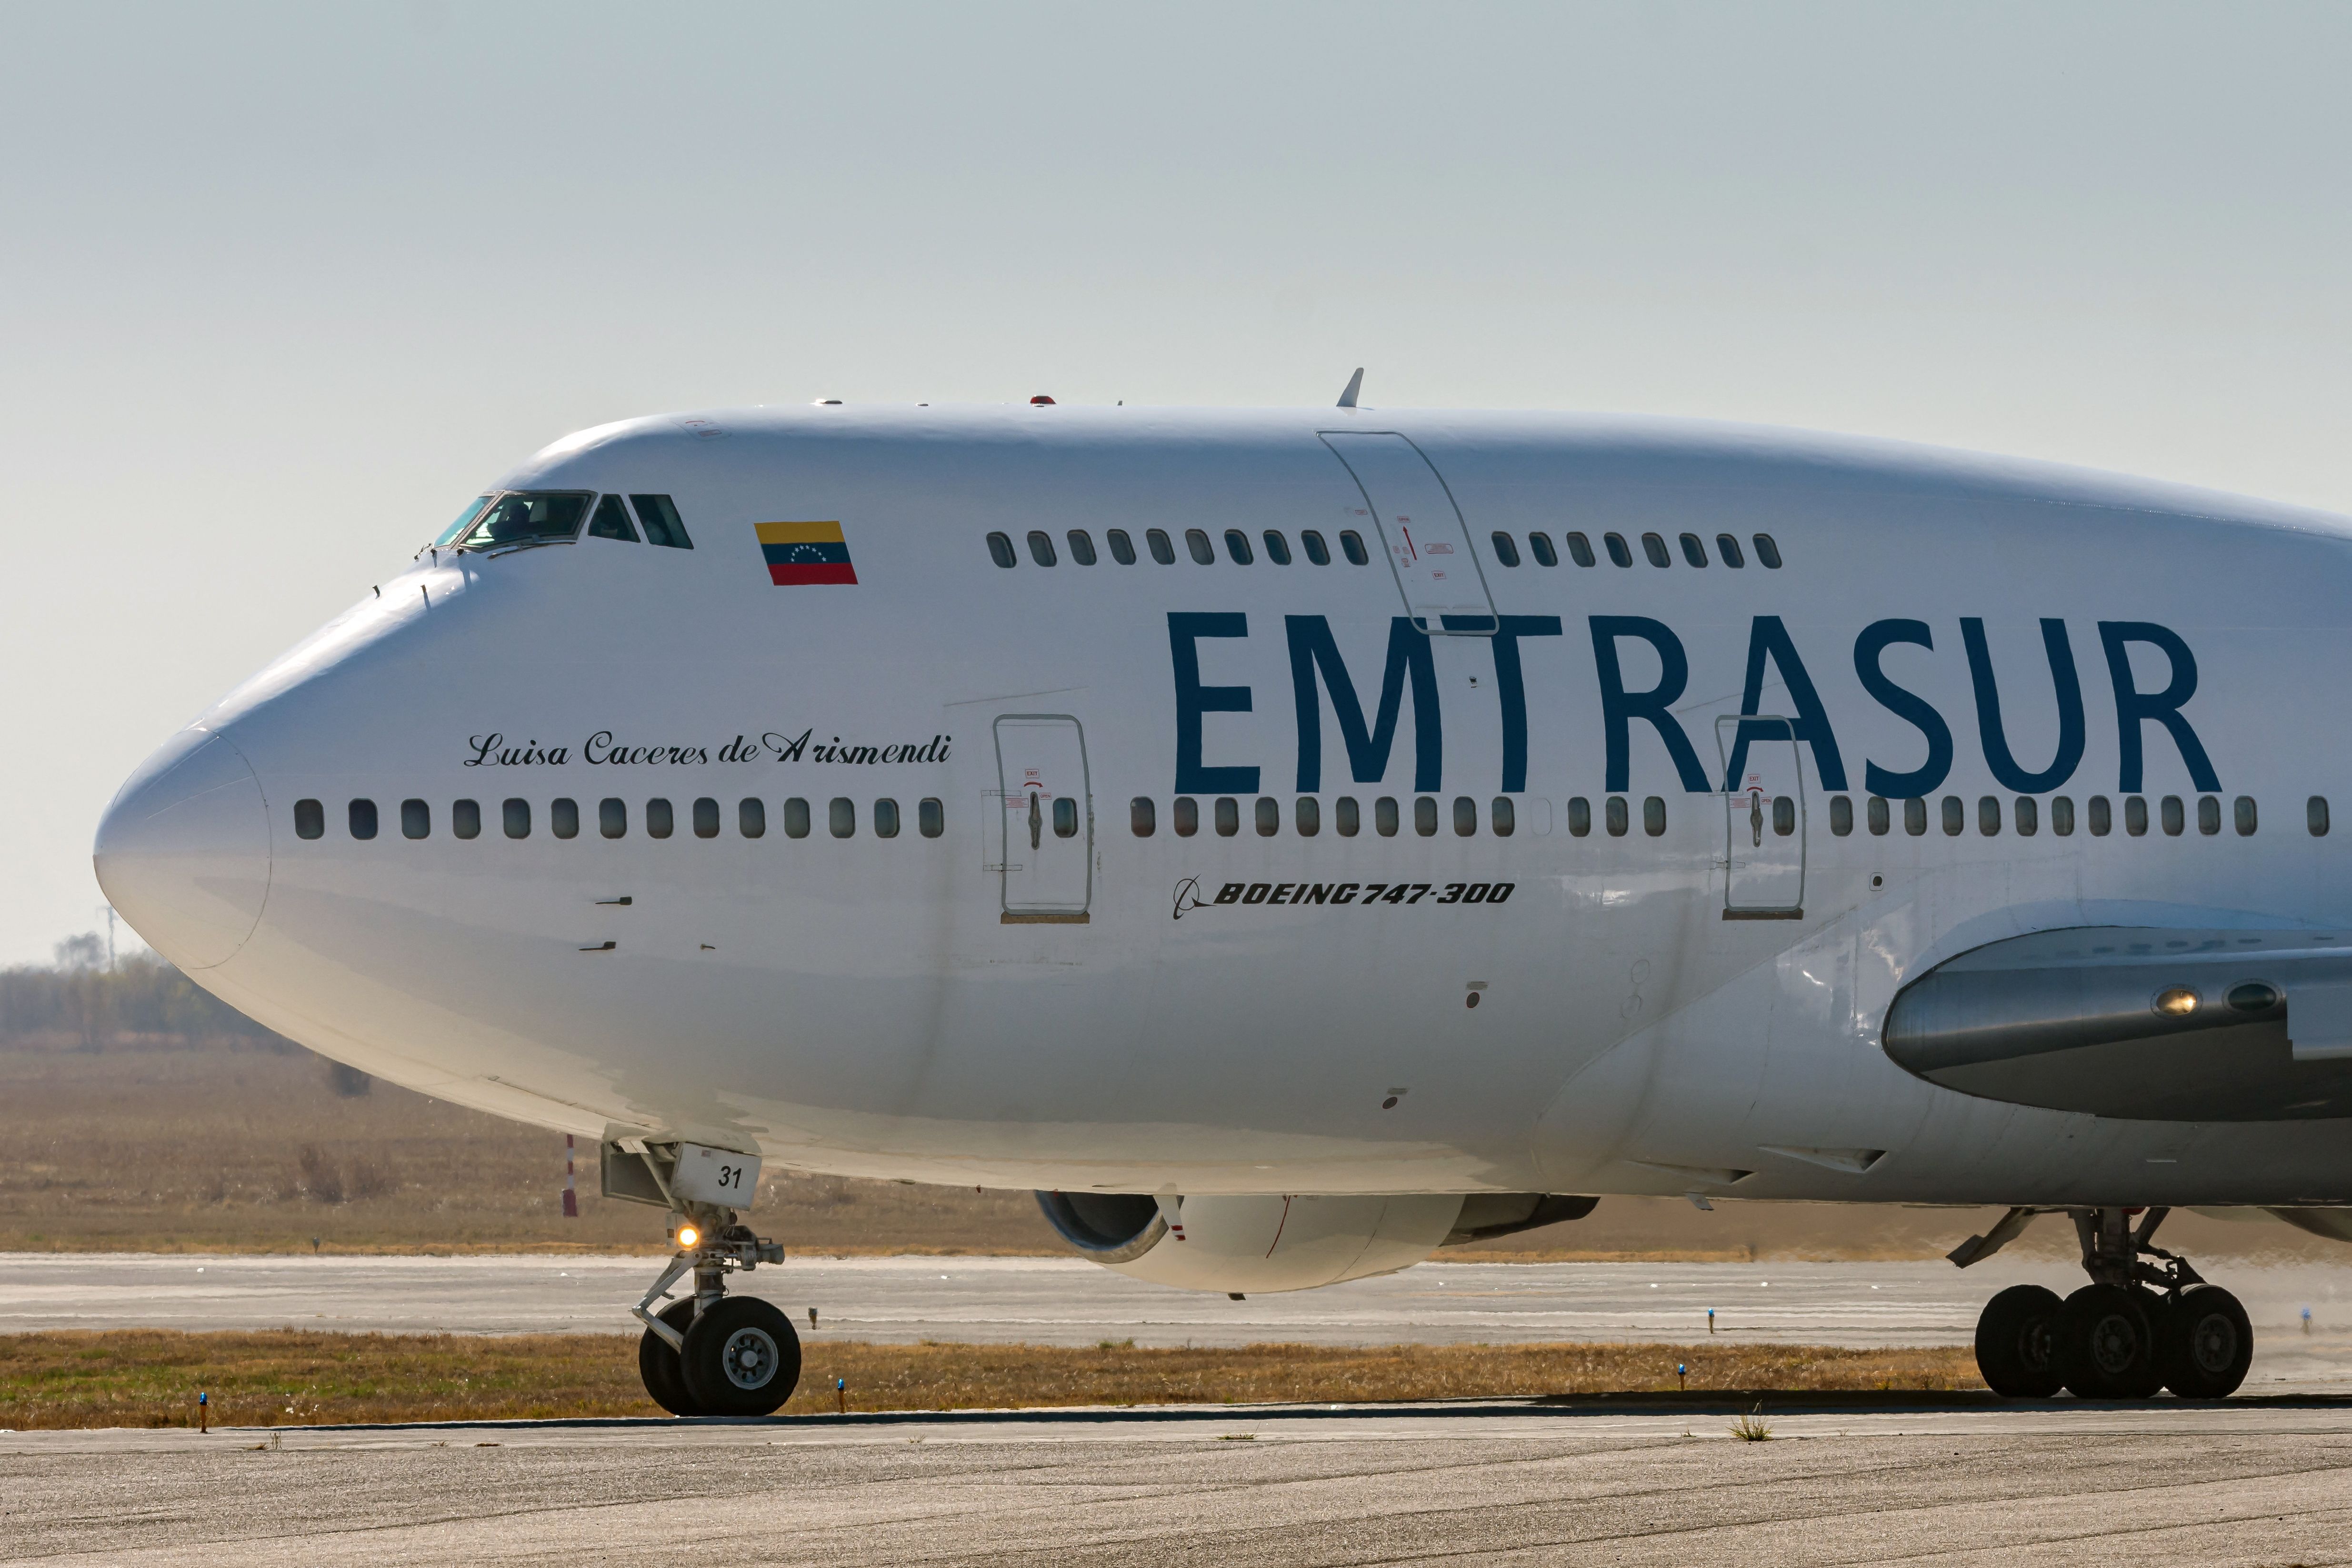 View of the Boeing 747-300 registrered number YV3531 of Venezuelan Emtrasur cargo airline at the international airport in Cordoba, Argentina